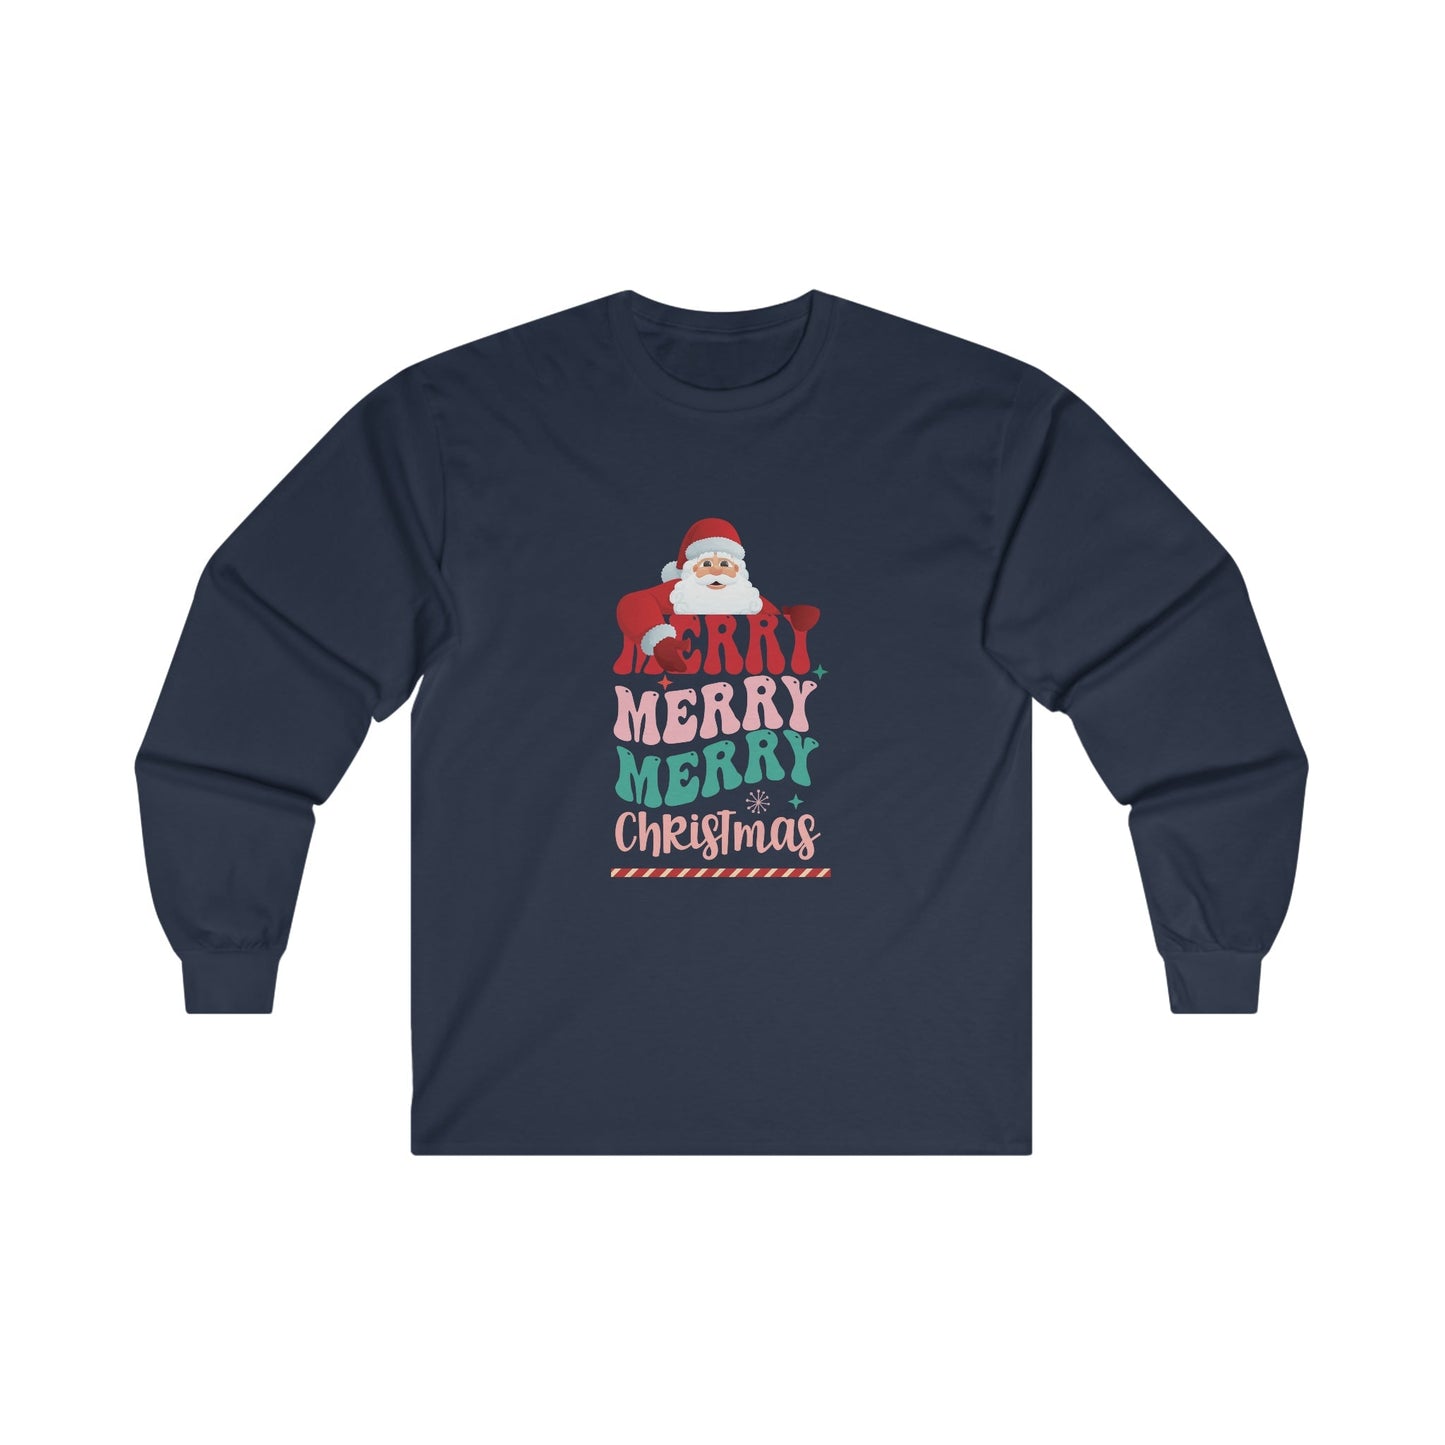 Christmas Long Sleeve T-Shirt - Merry Merry Merry Christmas - Cute Christmas Shirts - Youth and Adult Christmas Long Sleeve TShirts Long Sleeve T-Shirts Graphic Avenue Navy Adult Small 